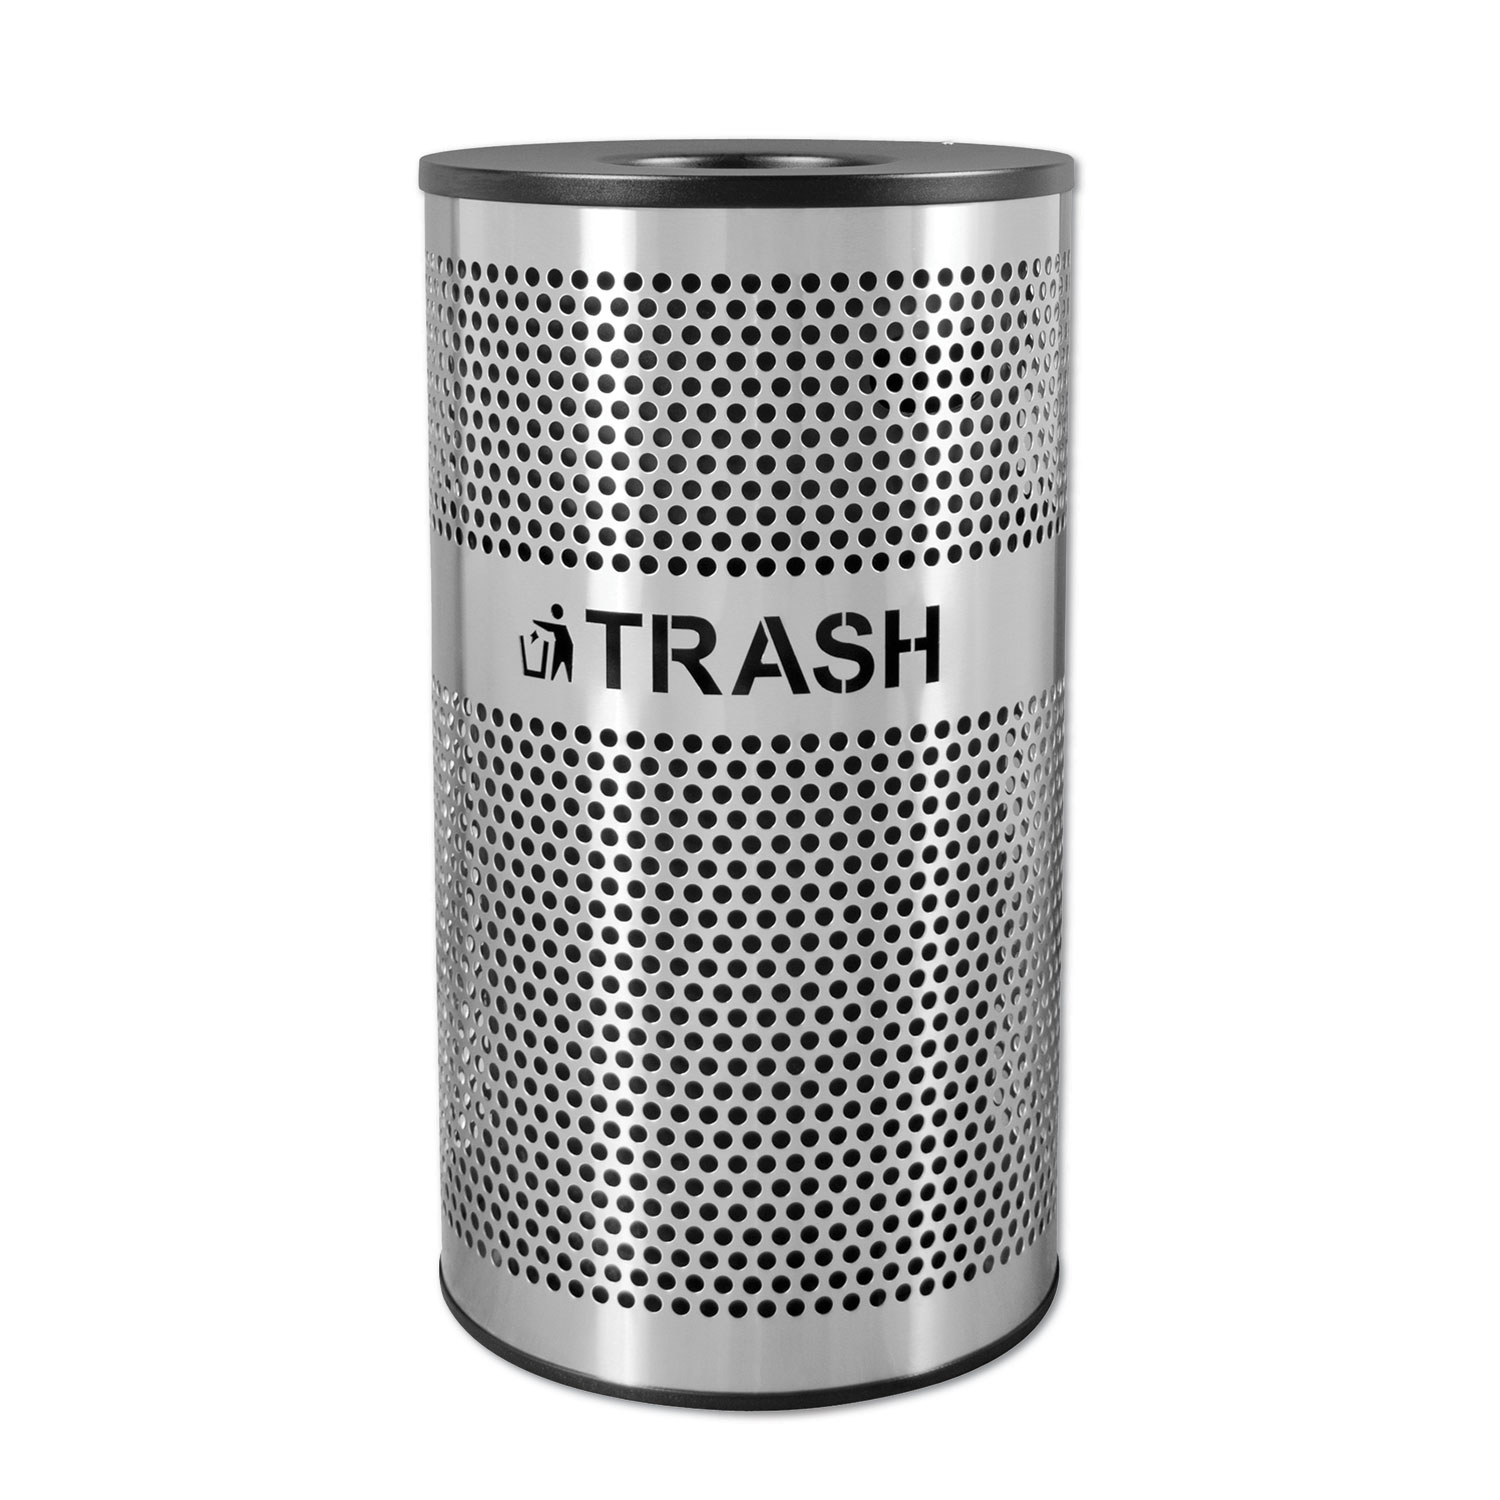  Ex-Cell VCT-33 PERF SS Stainless Steel Trash Receptacle, 33 gal, Stainless Steel (EXCVCT33PERFS) 